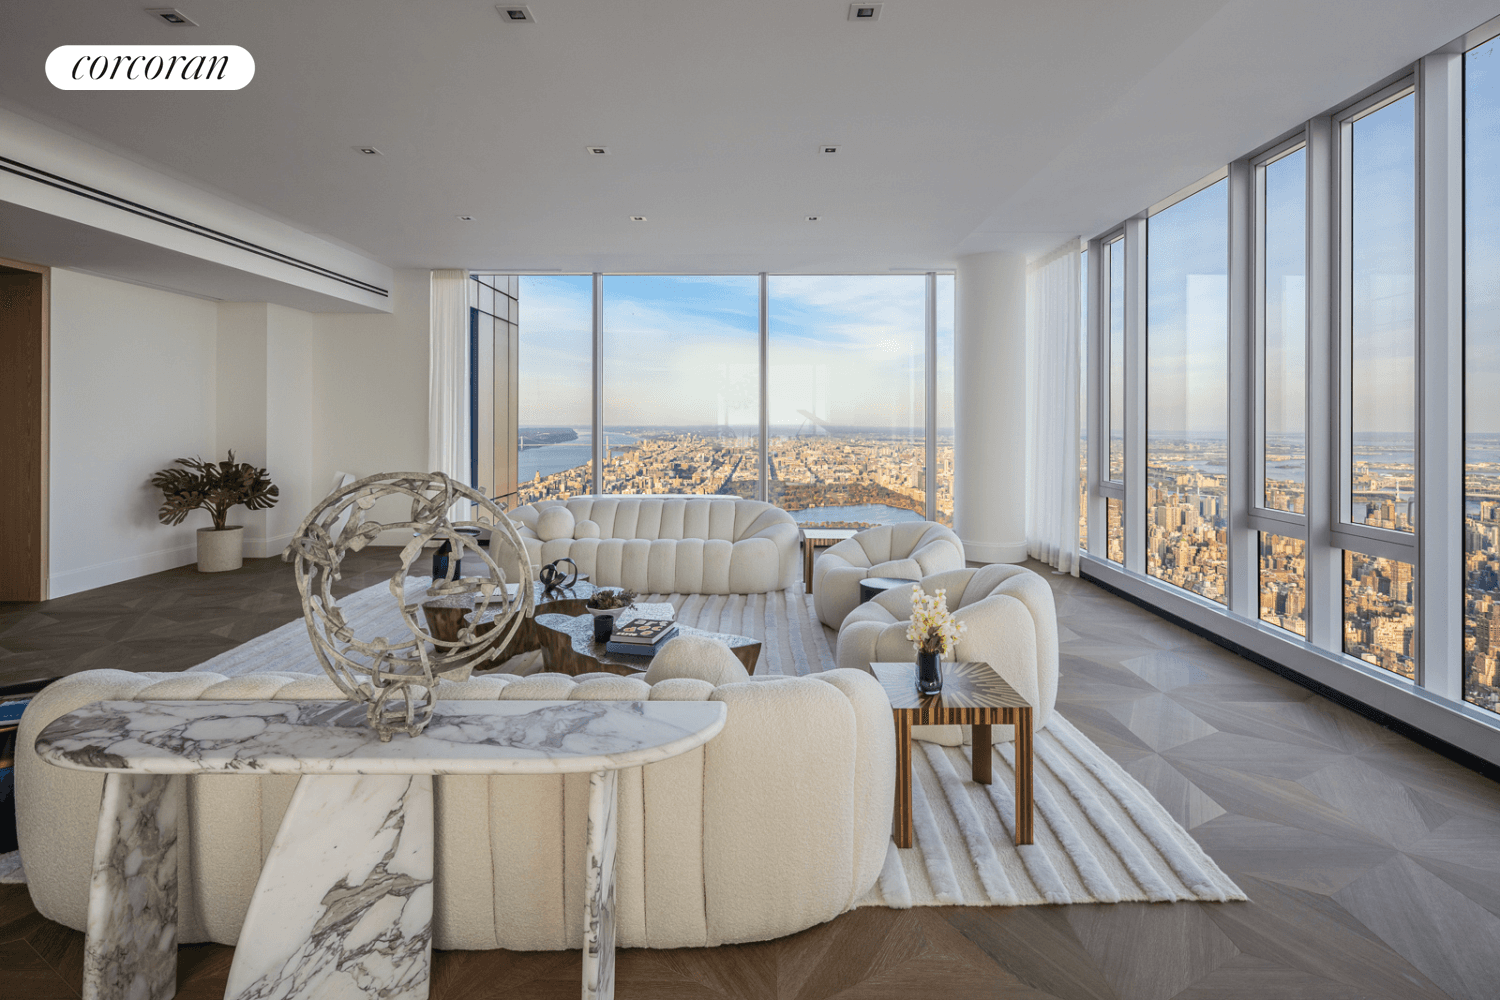 Forever views of Central Park are yours in this exquisite full floor condominium residence at Central Park Tower.